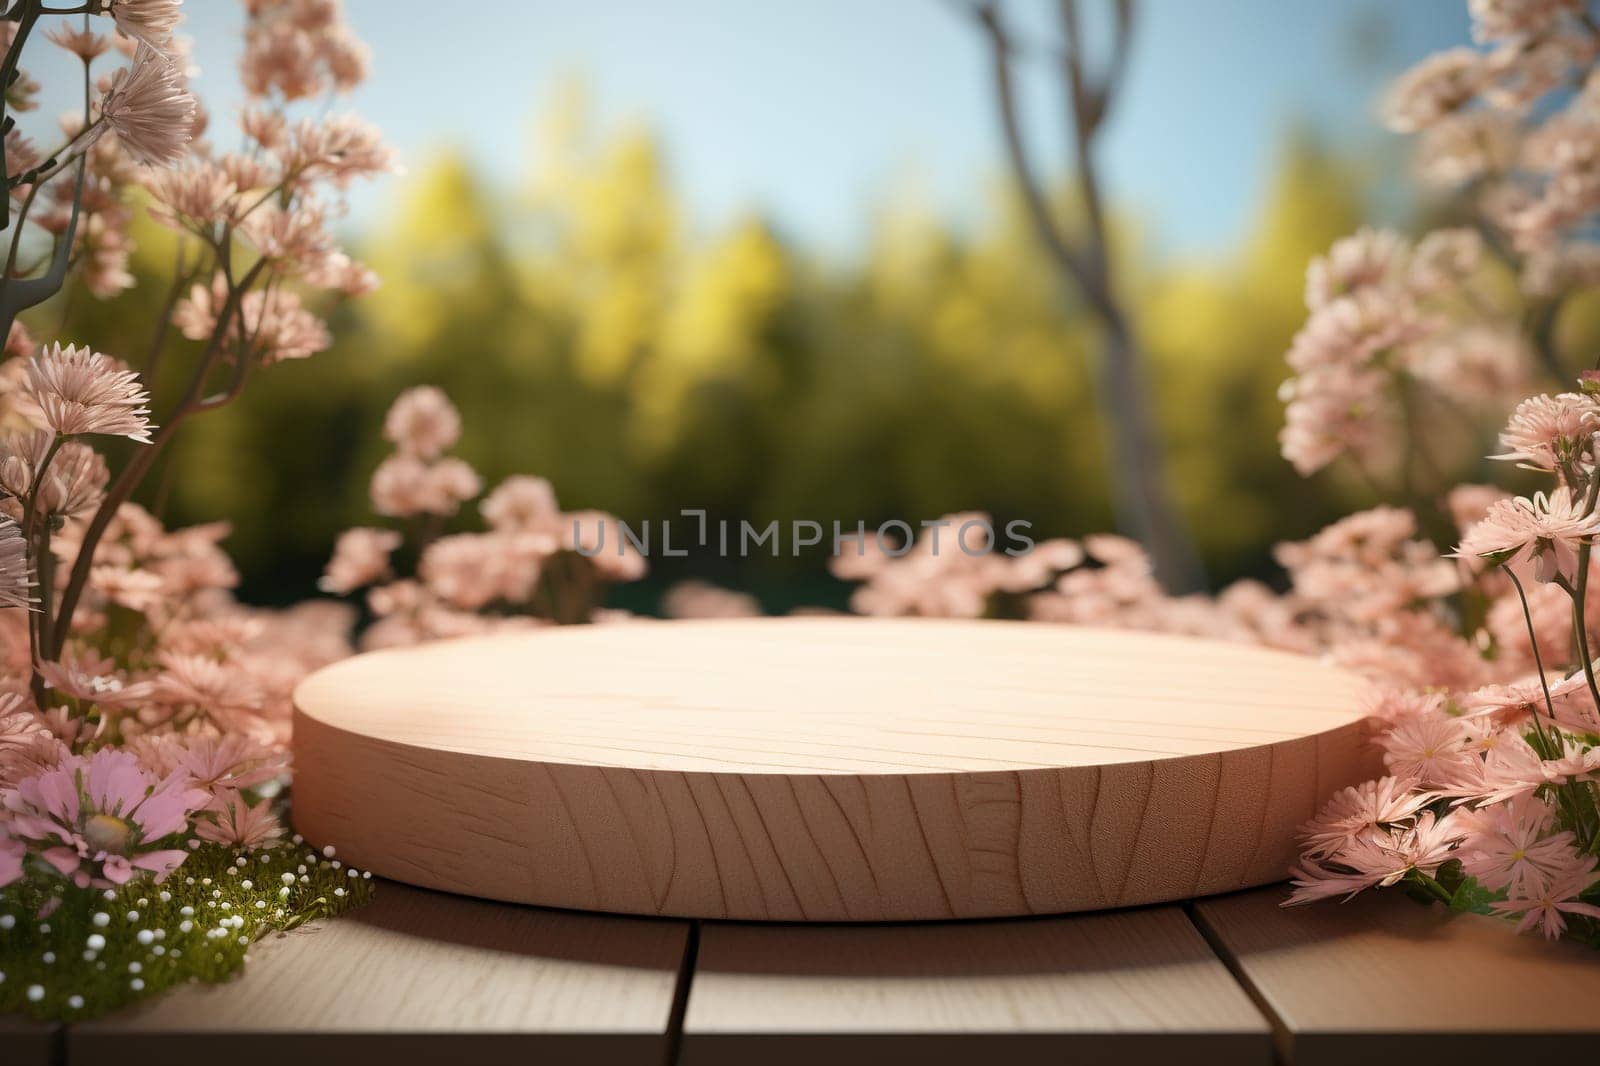 Wooden podium in nature with flowers. Blurred nature background. Stand for placing natural products. Generated by artificial intelligence by Vovmar